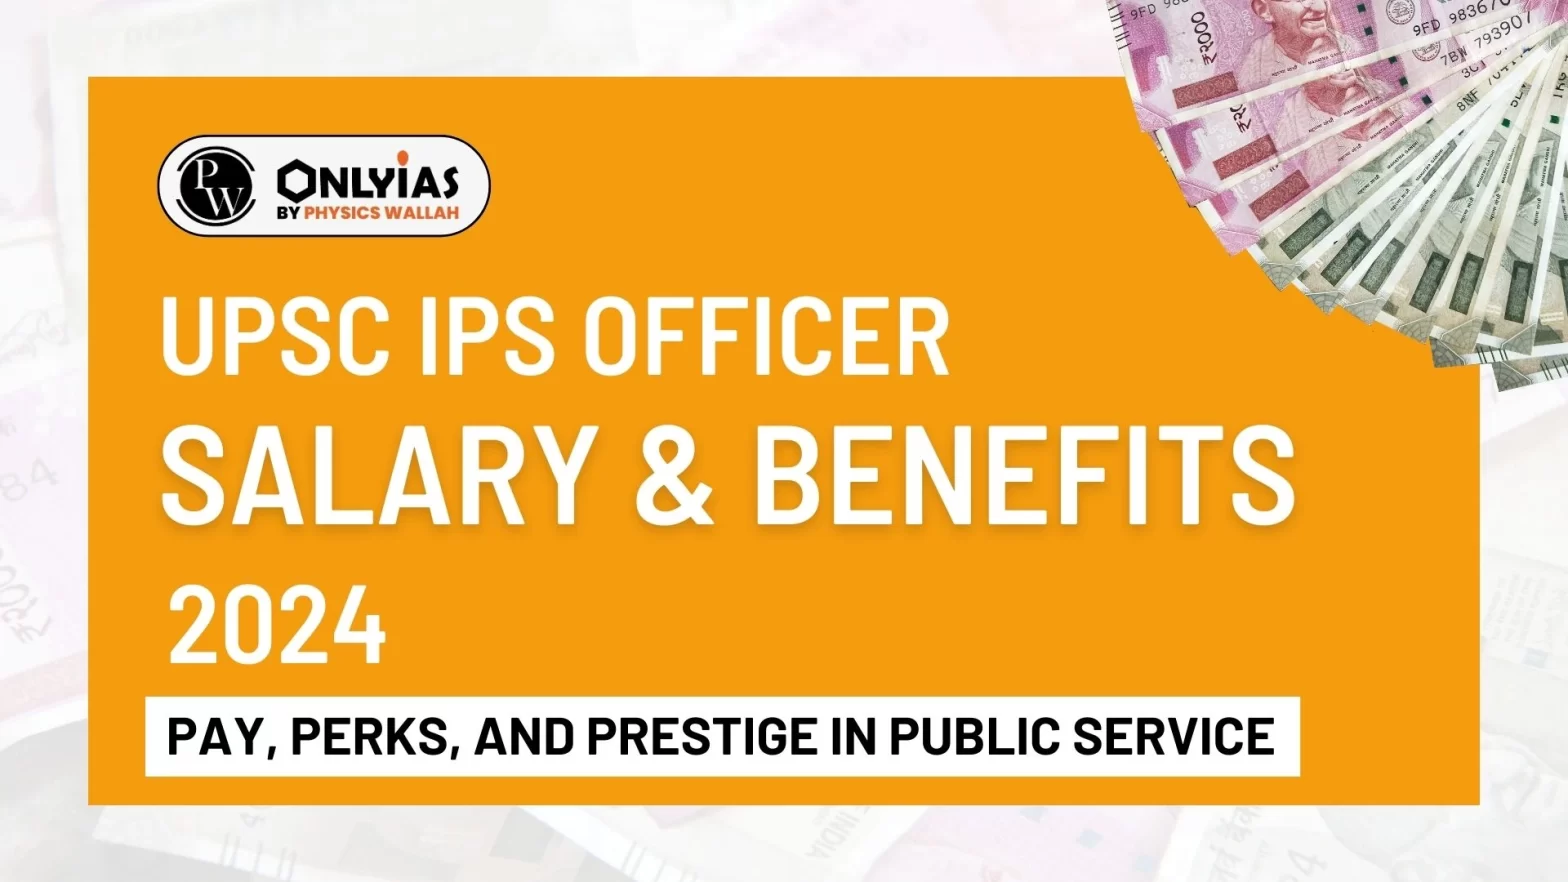 UPSC IPS Officer Salary & Benefits 2024: Pay, Perks, and Prestige in Public Service